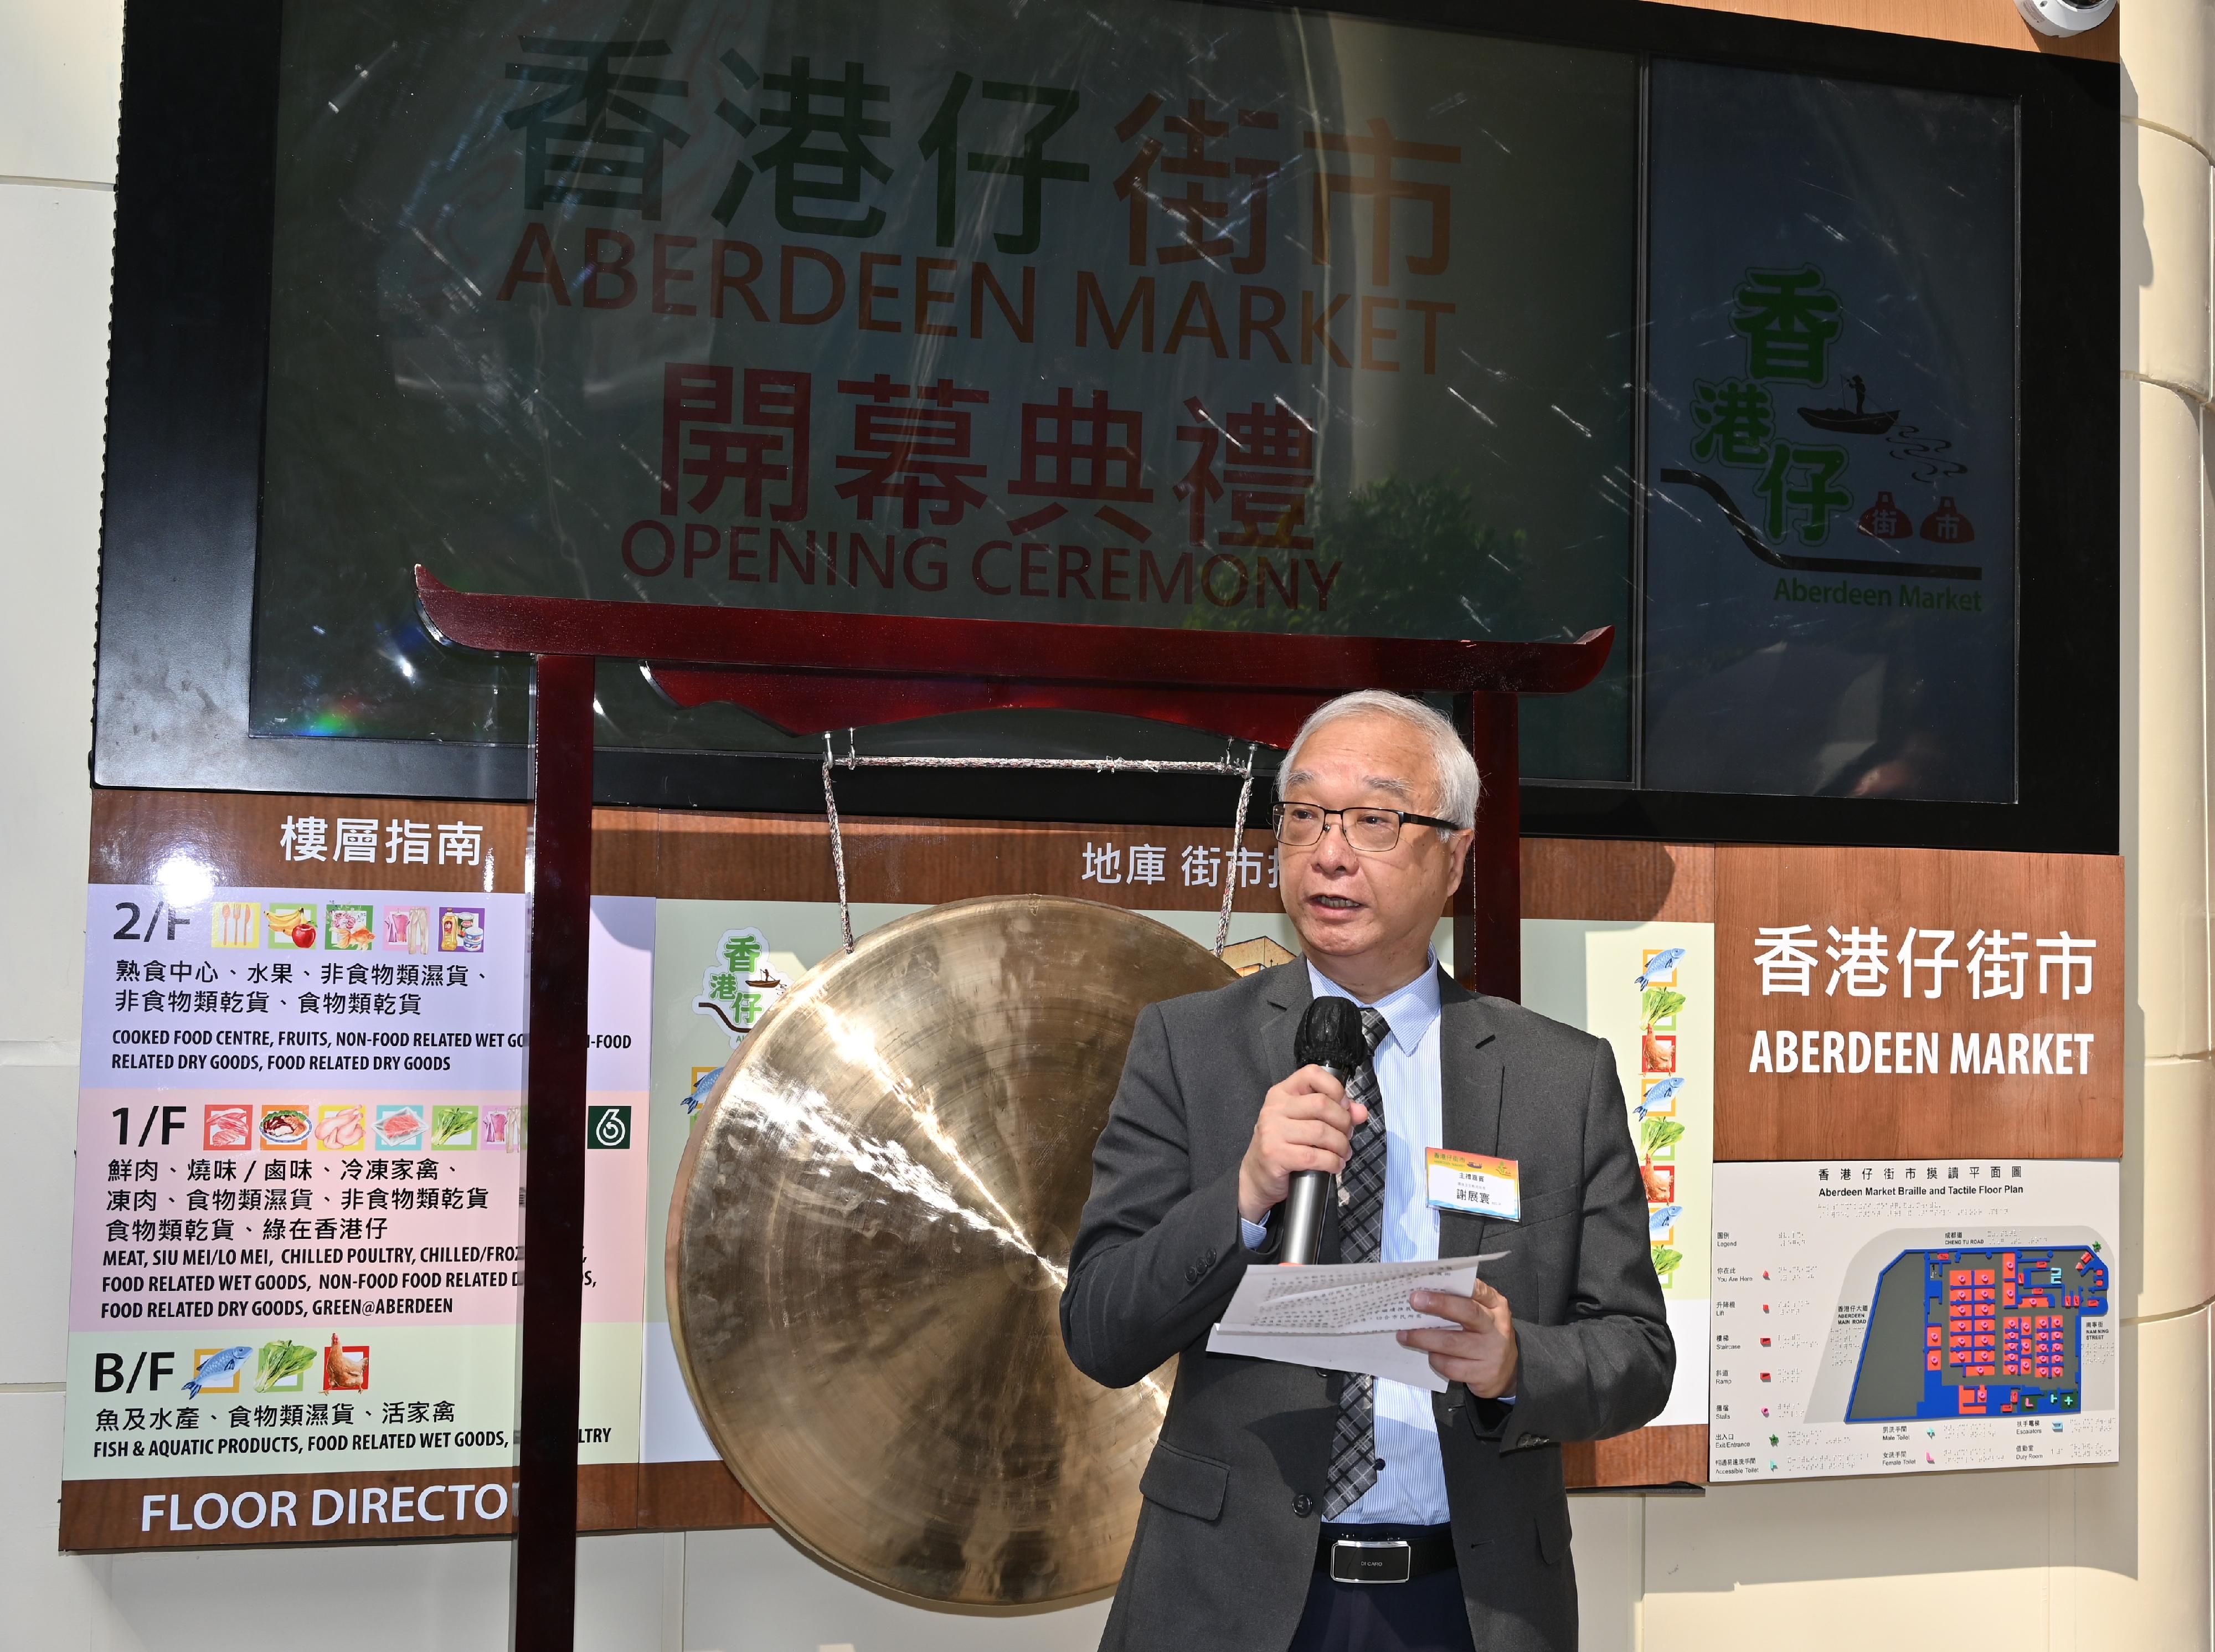 The opening ceremony of the overhauled Aberdeen Market under the Food and Environmental Hygiene Department was held today (May 19). Photo shows the Secretary for Environment and Ecology, Mr Tse Chin-wan, speaking at the opening ceremony.